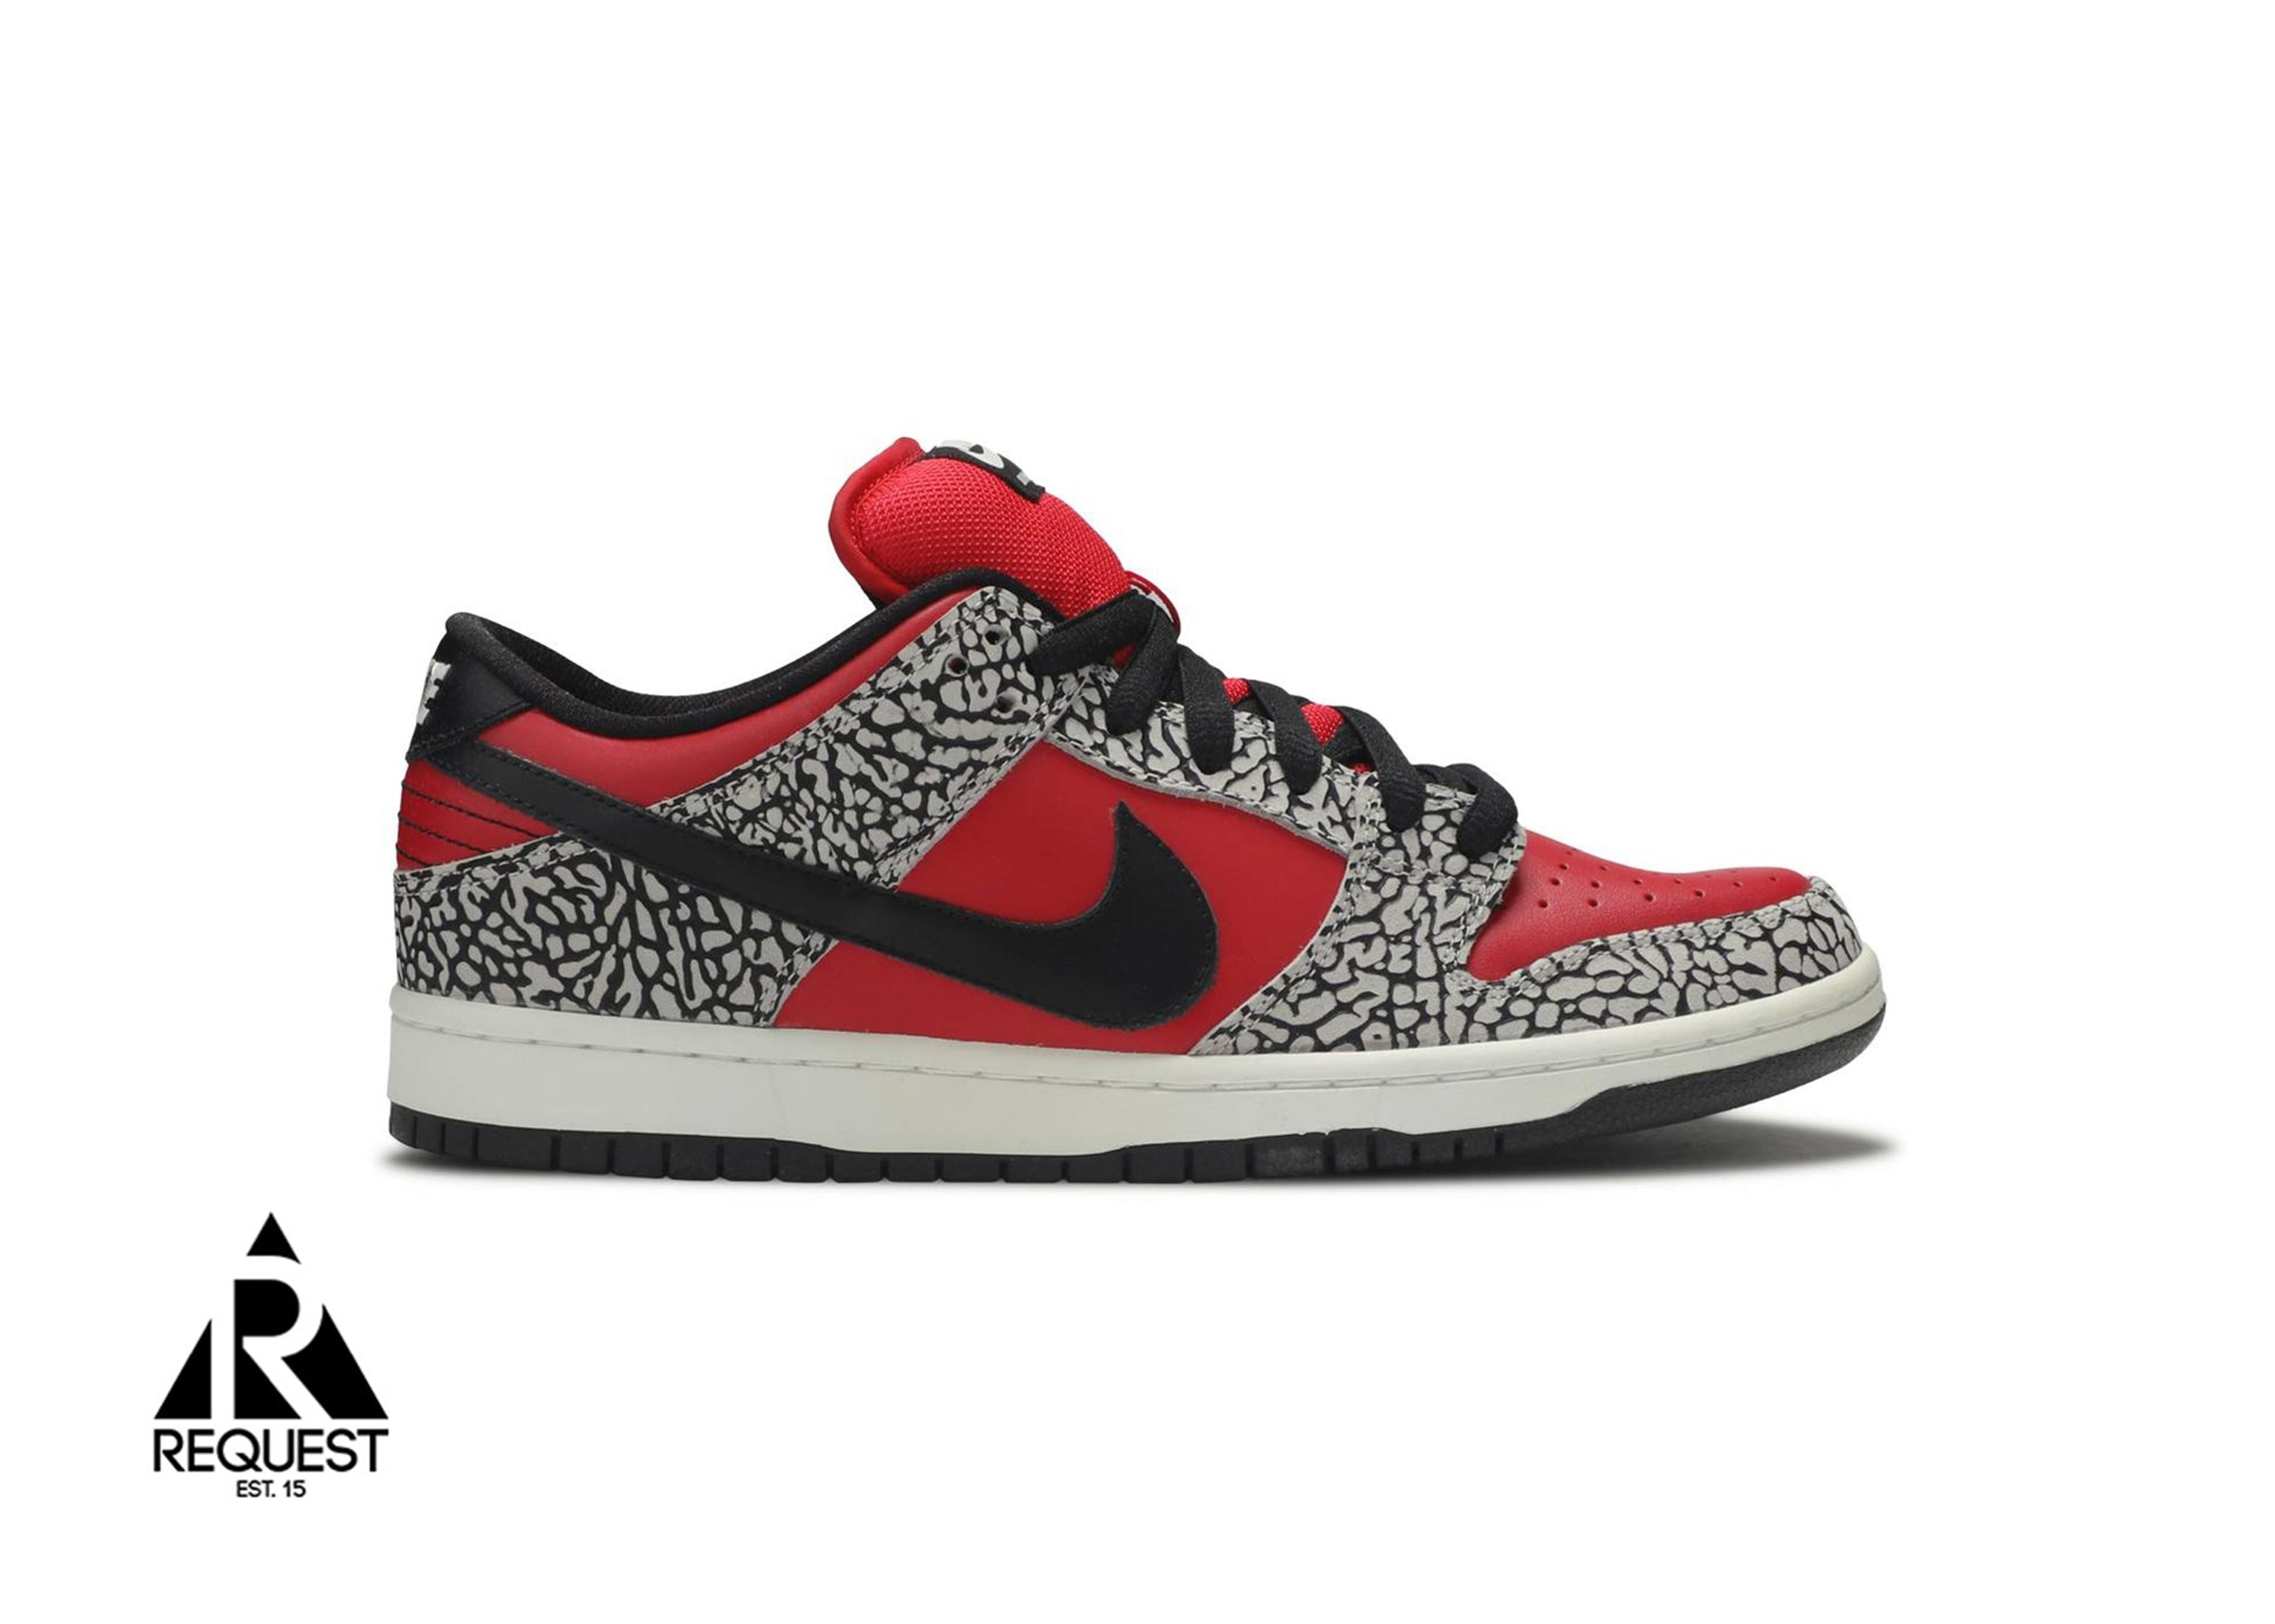 Nike Dunk SB Low “ Red Cement”